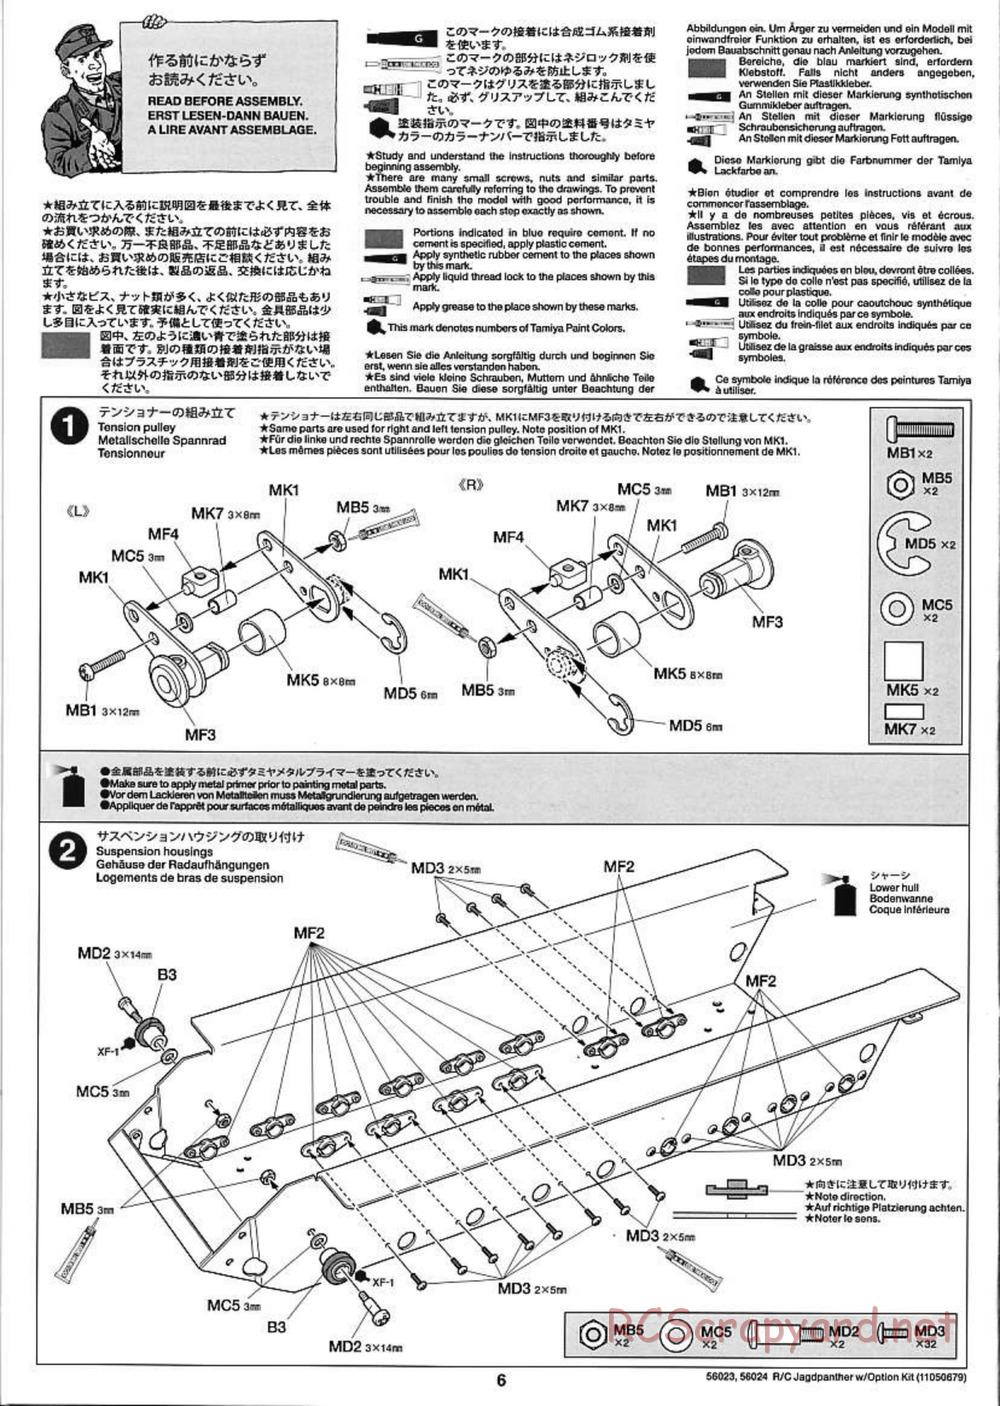 Tamiya - Jagdpanther - 1/16 Scale Chassis - Manual - Page 6